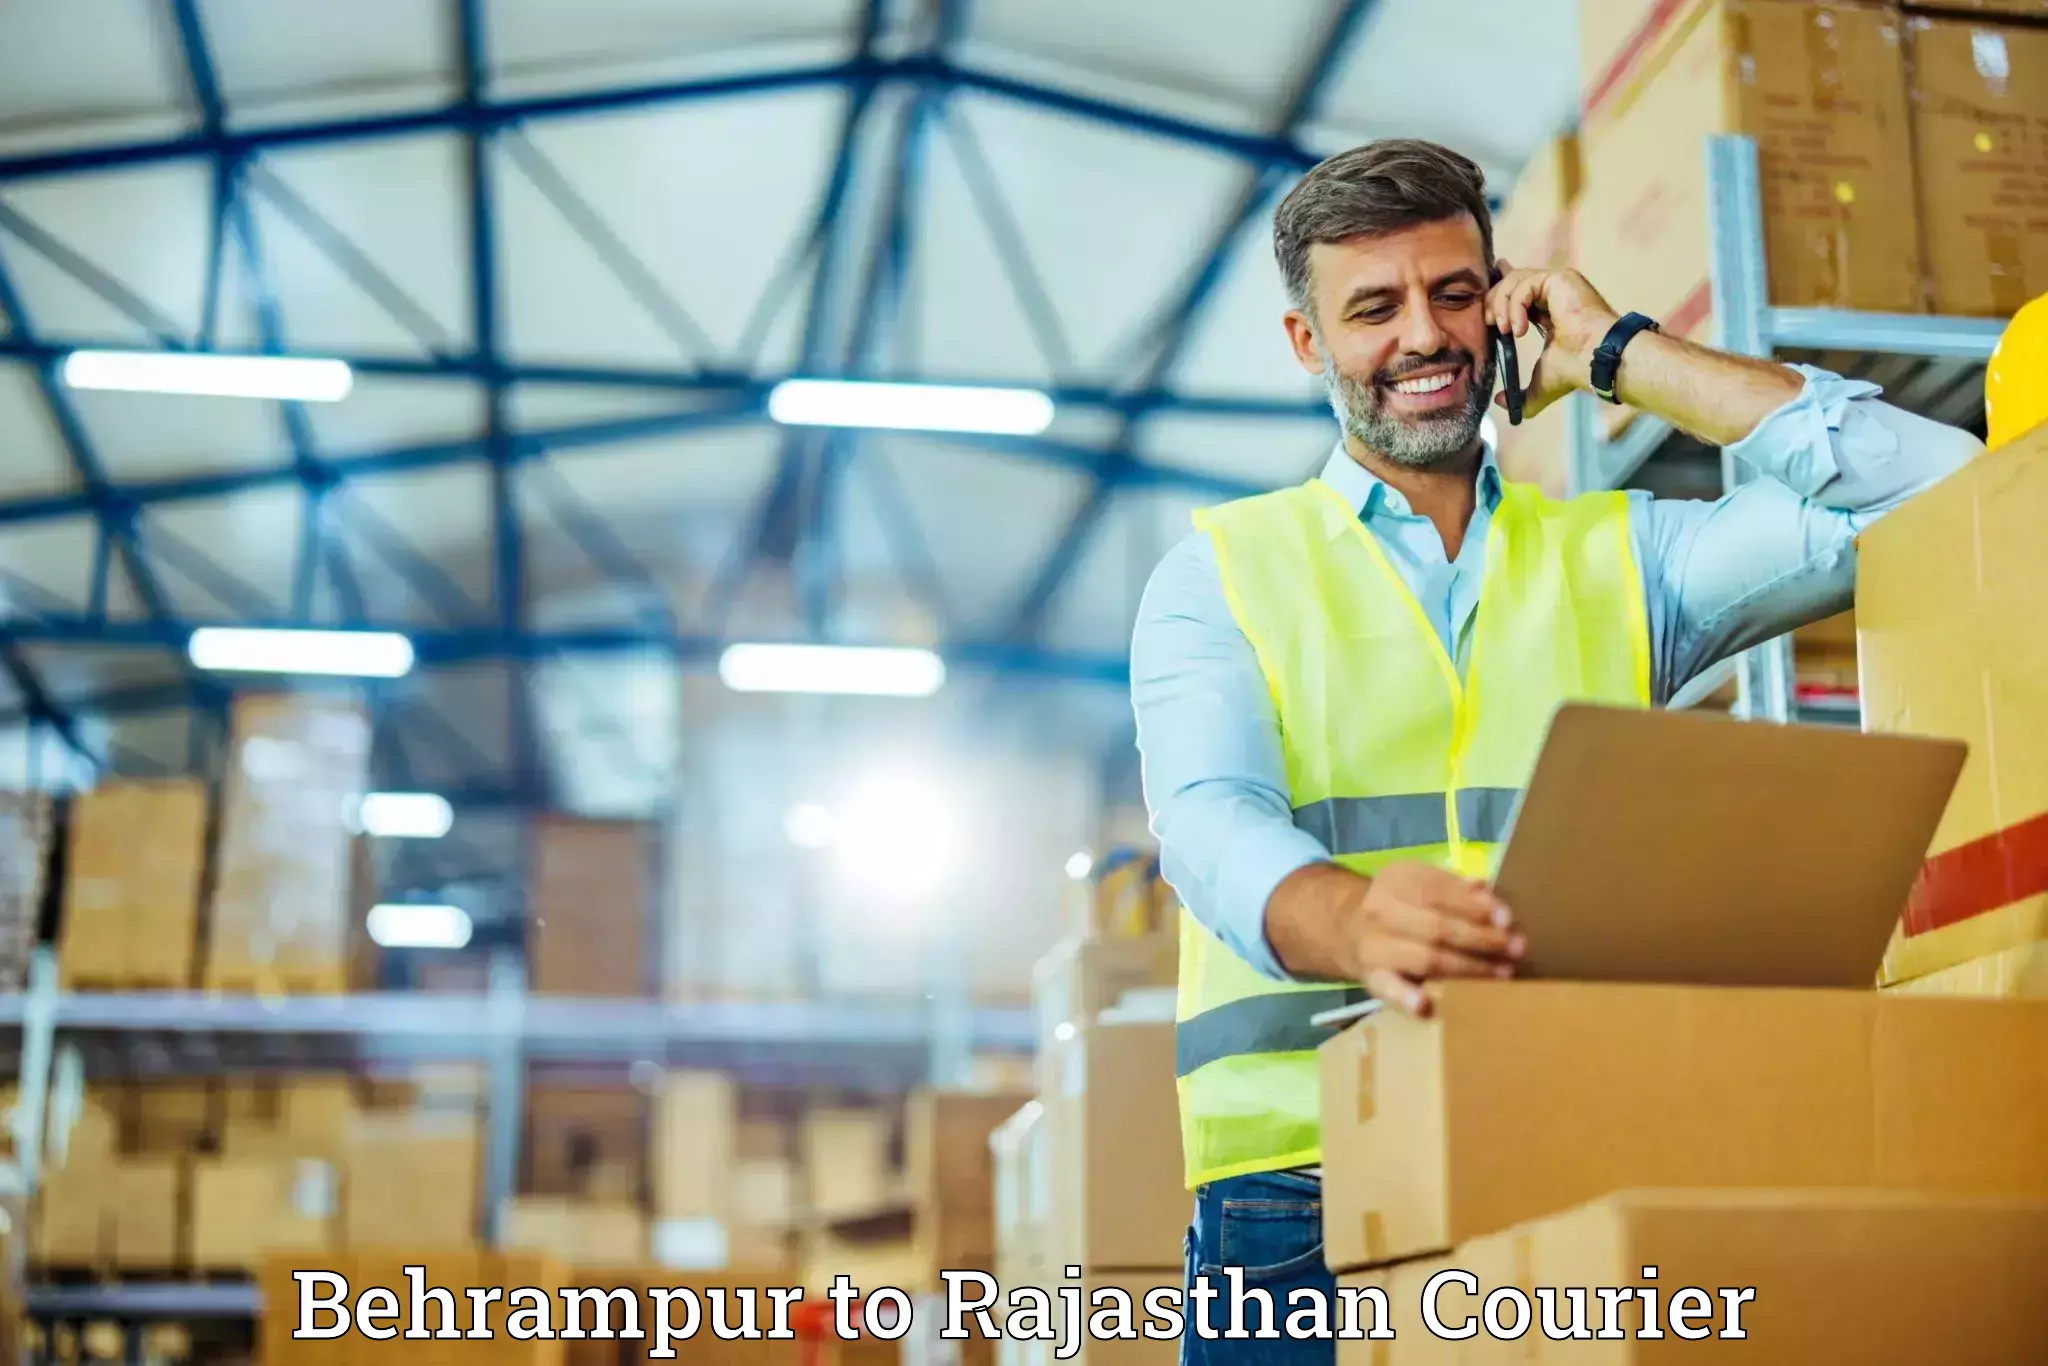 Professional moving company Behrampur to Dudu